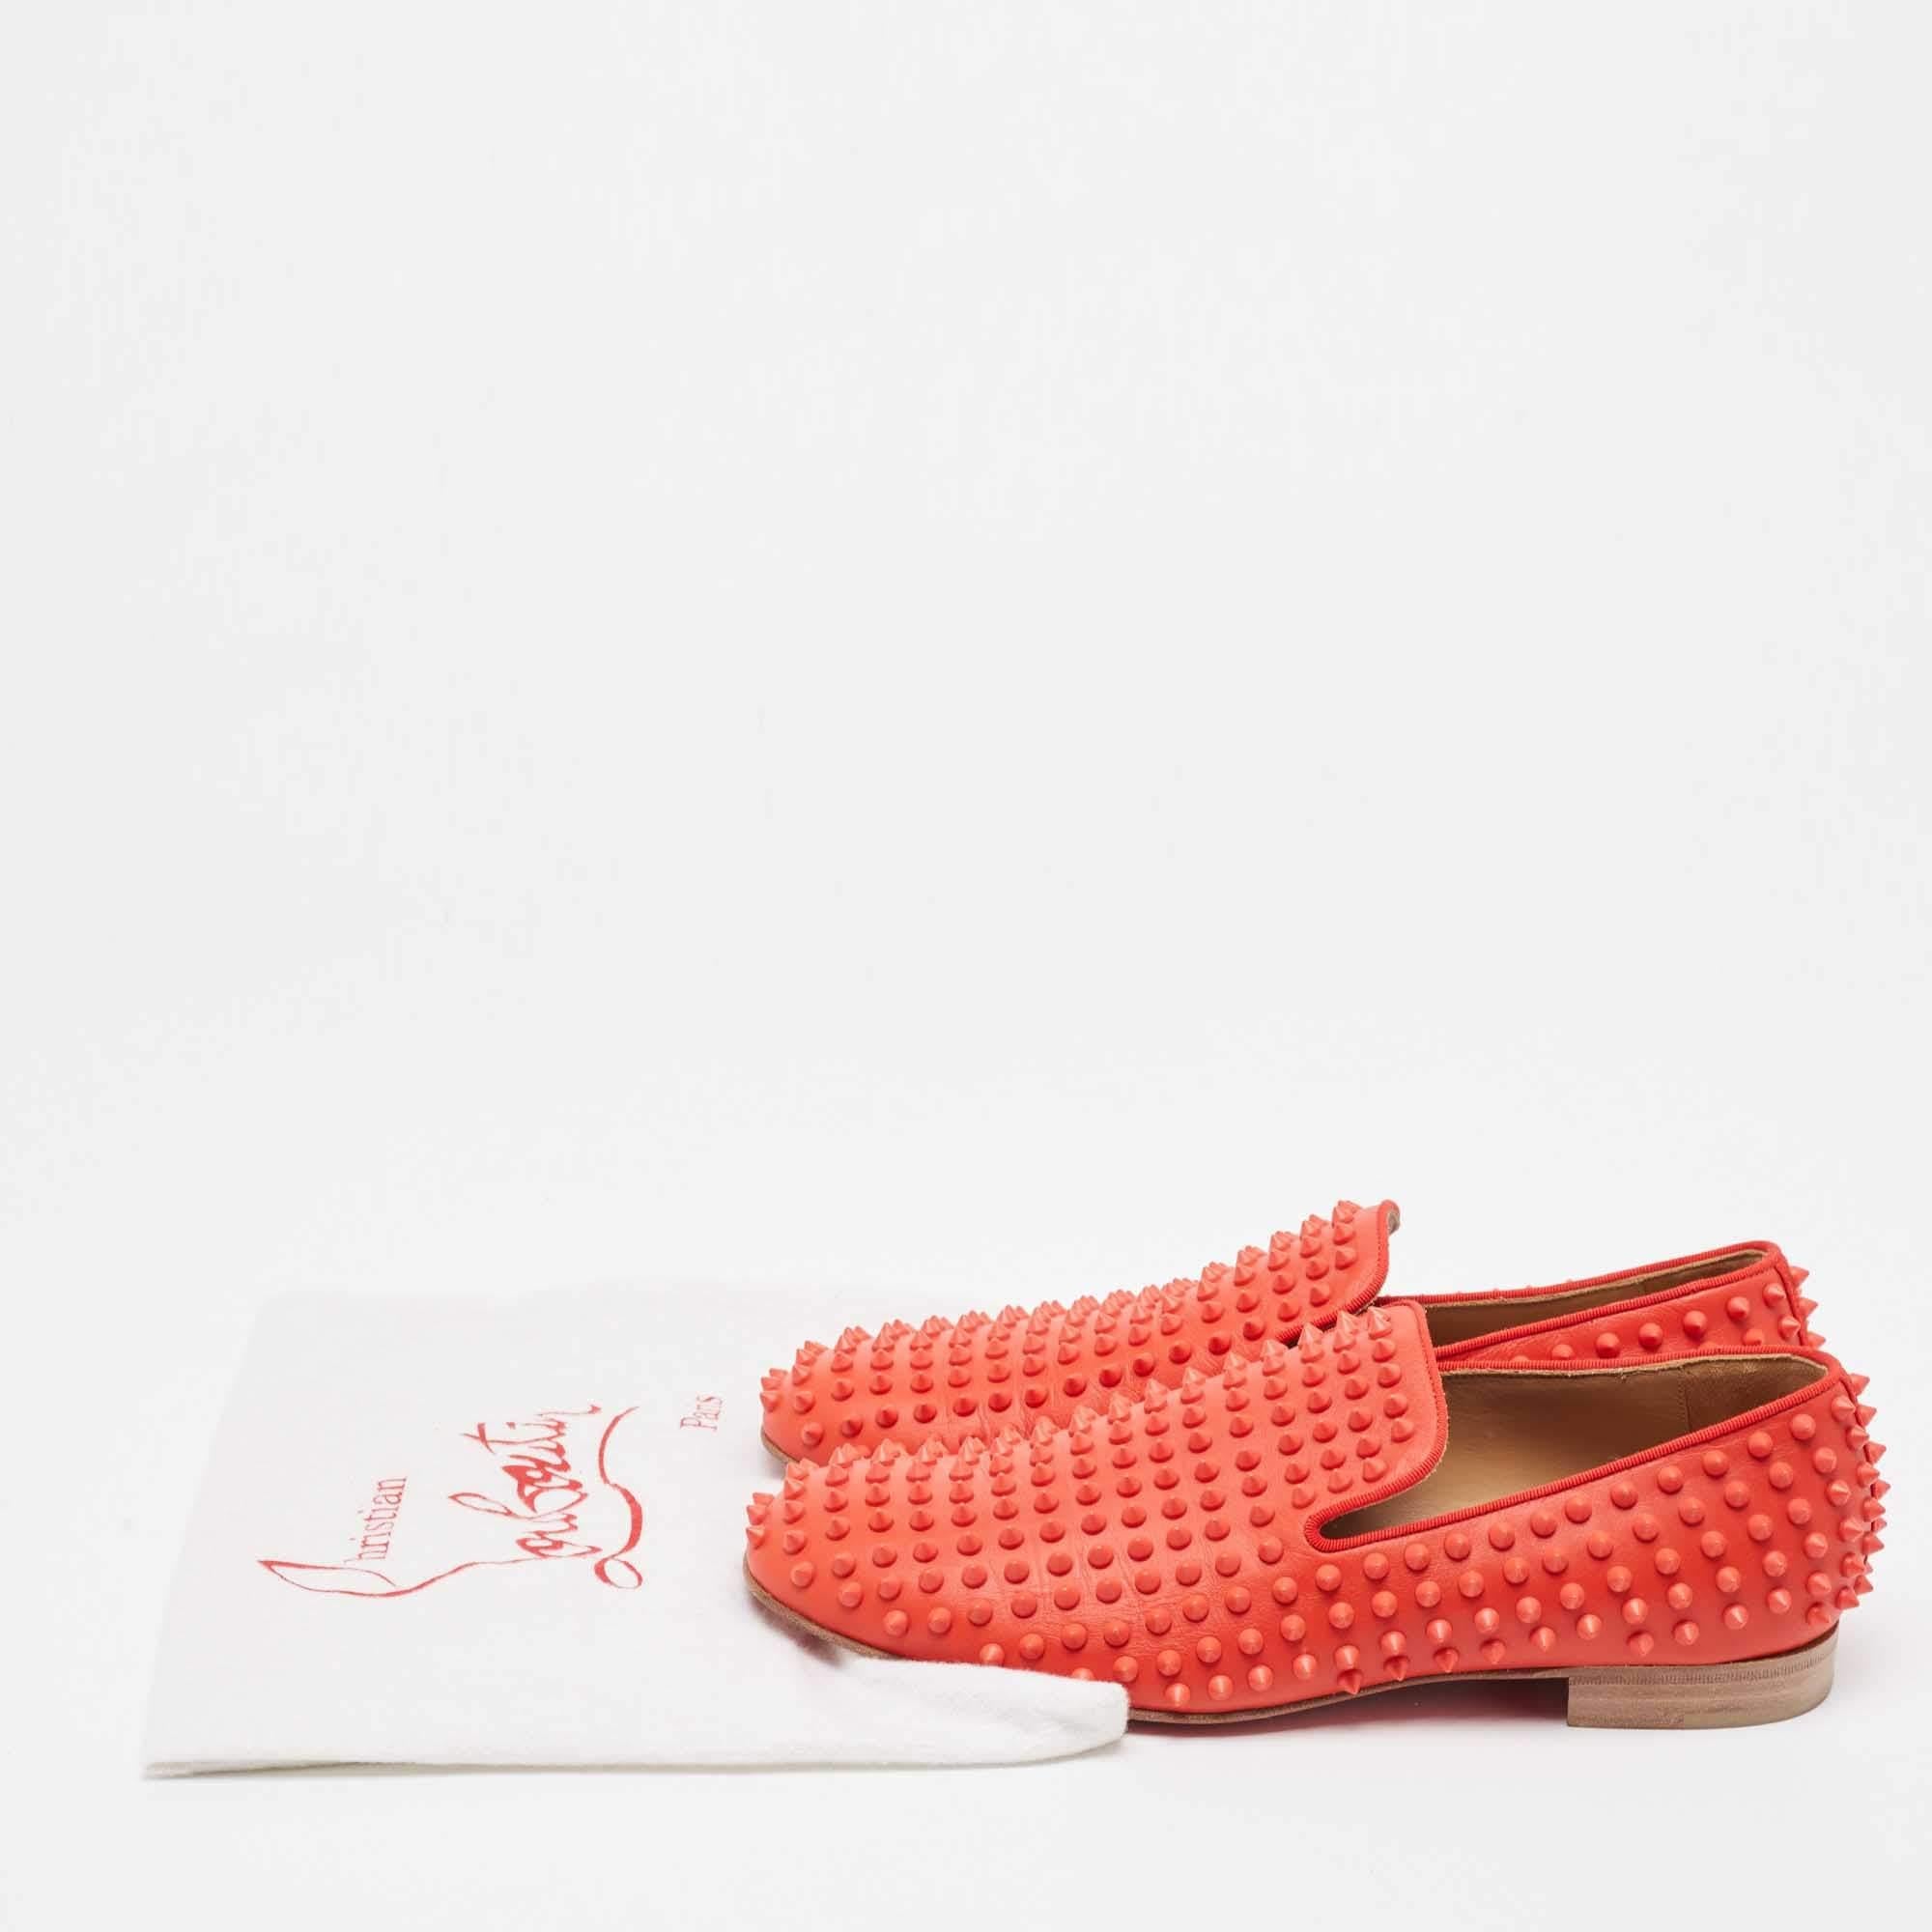 Christian Louboutin Red Leather Rollerboy Spikes Smoking Slippers Size 42 4